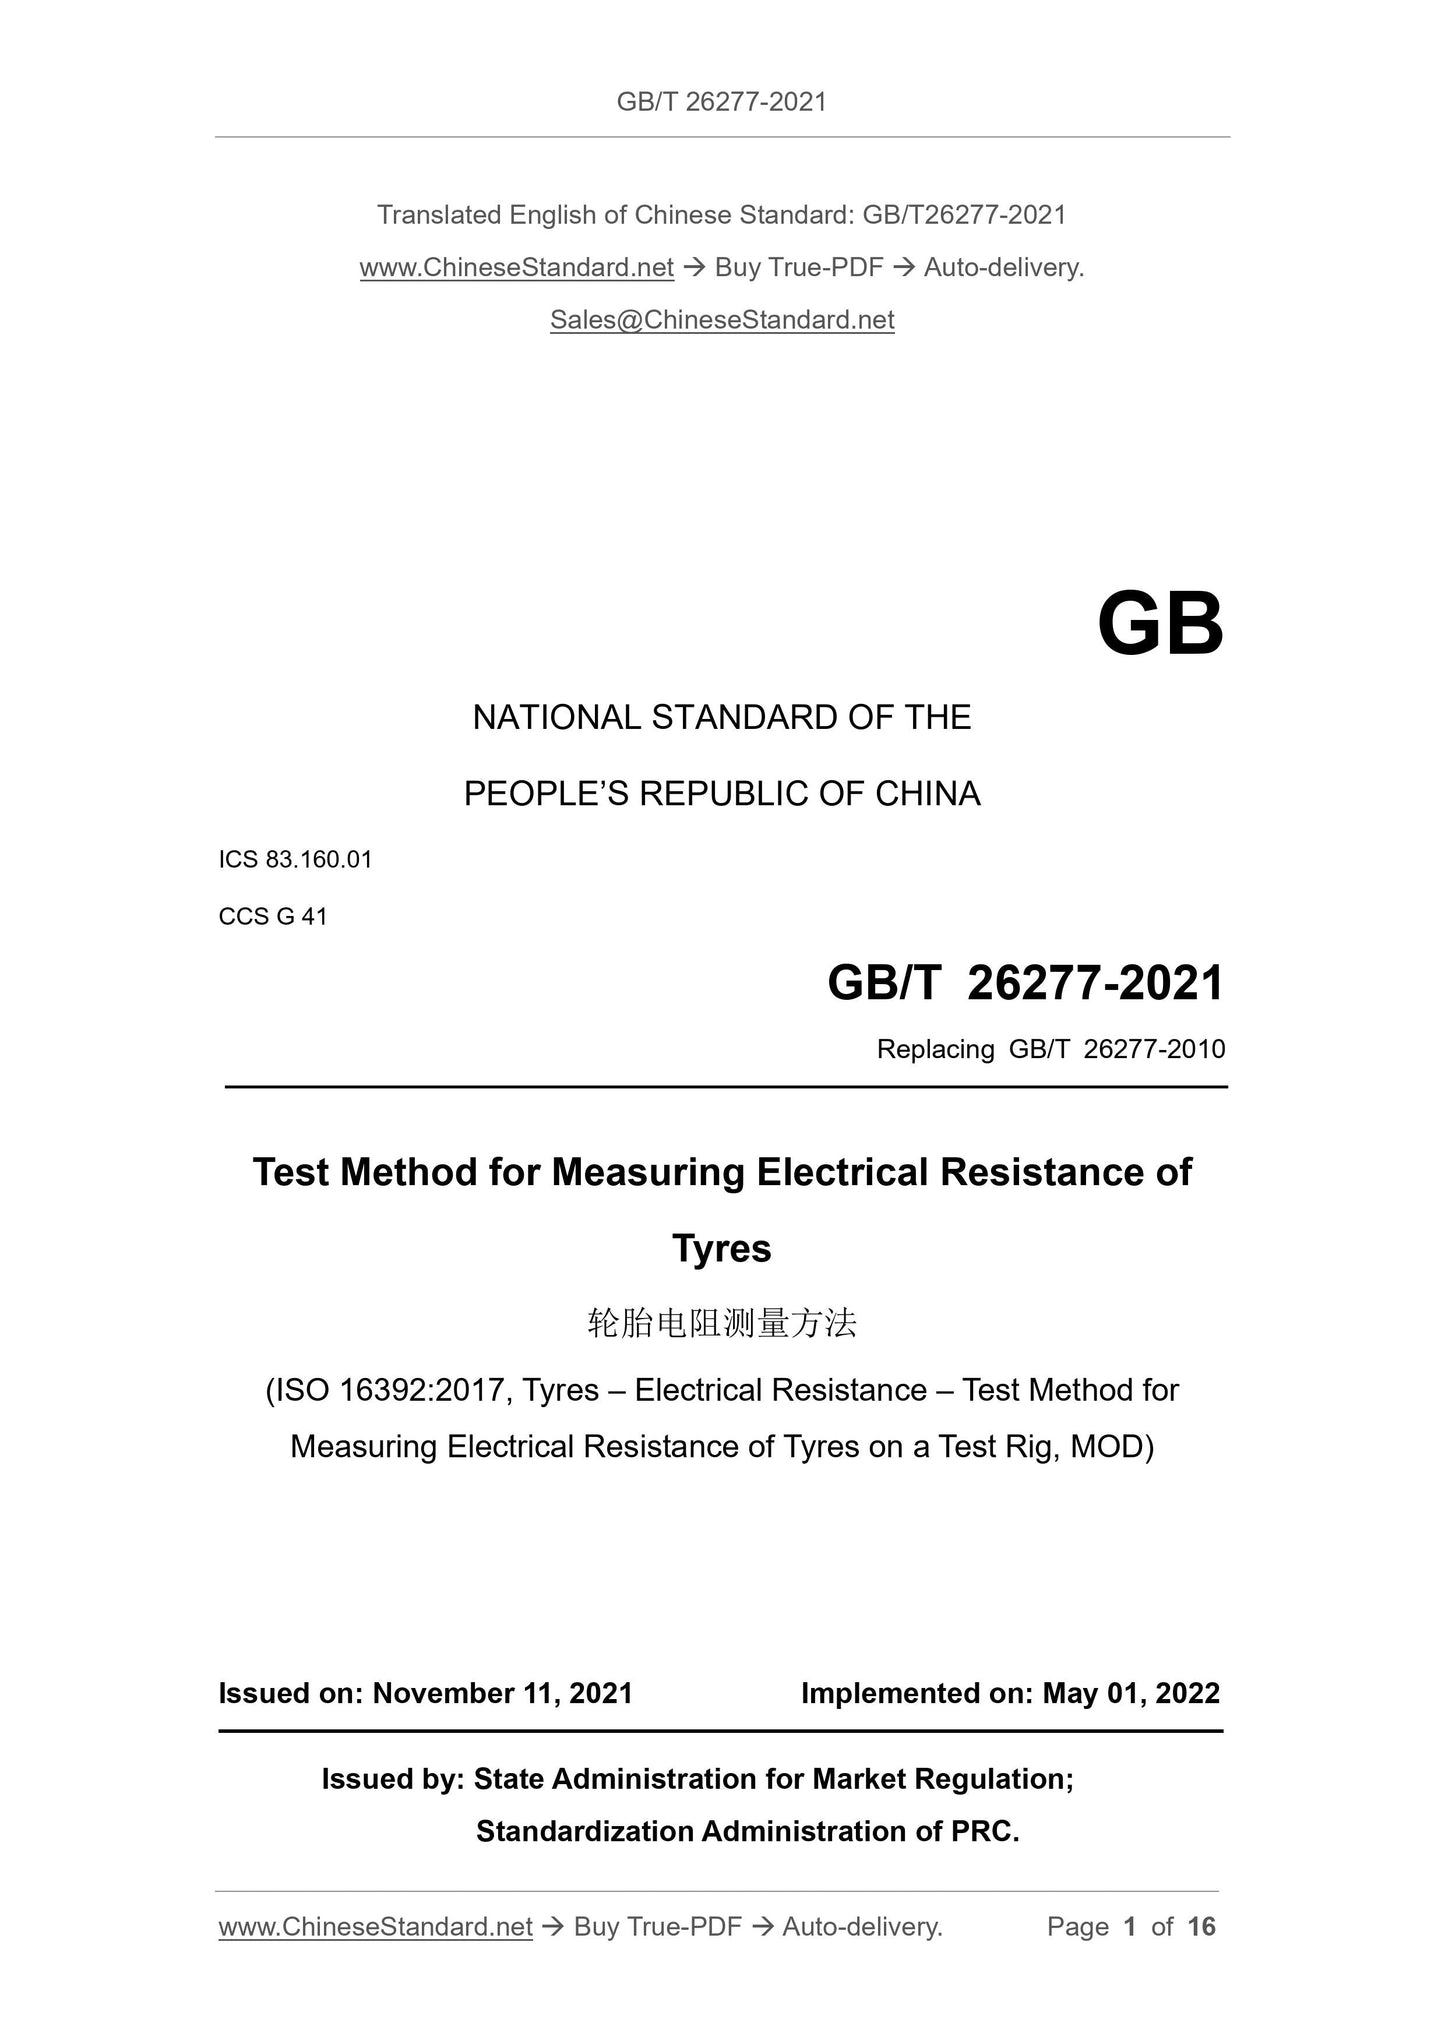 GB/T 26277-2021 Page 1